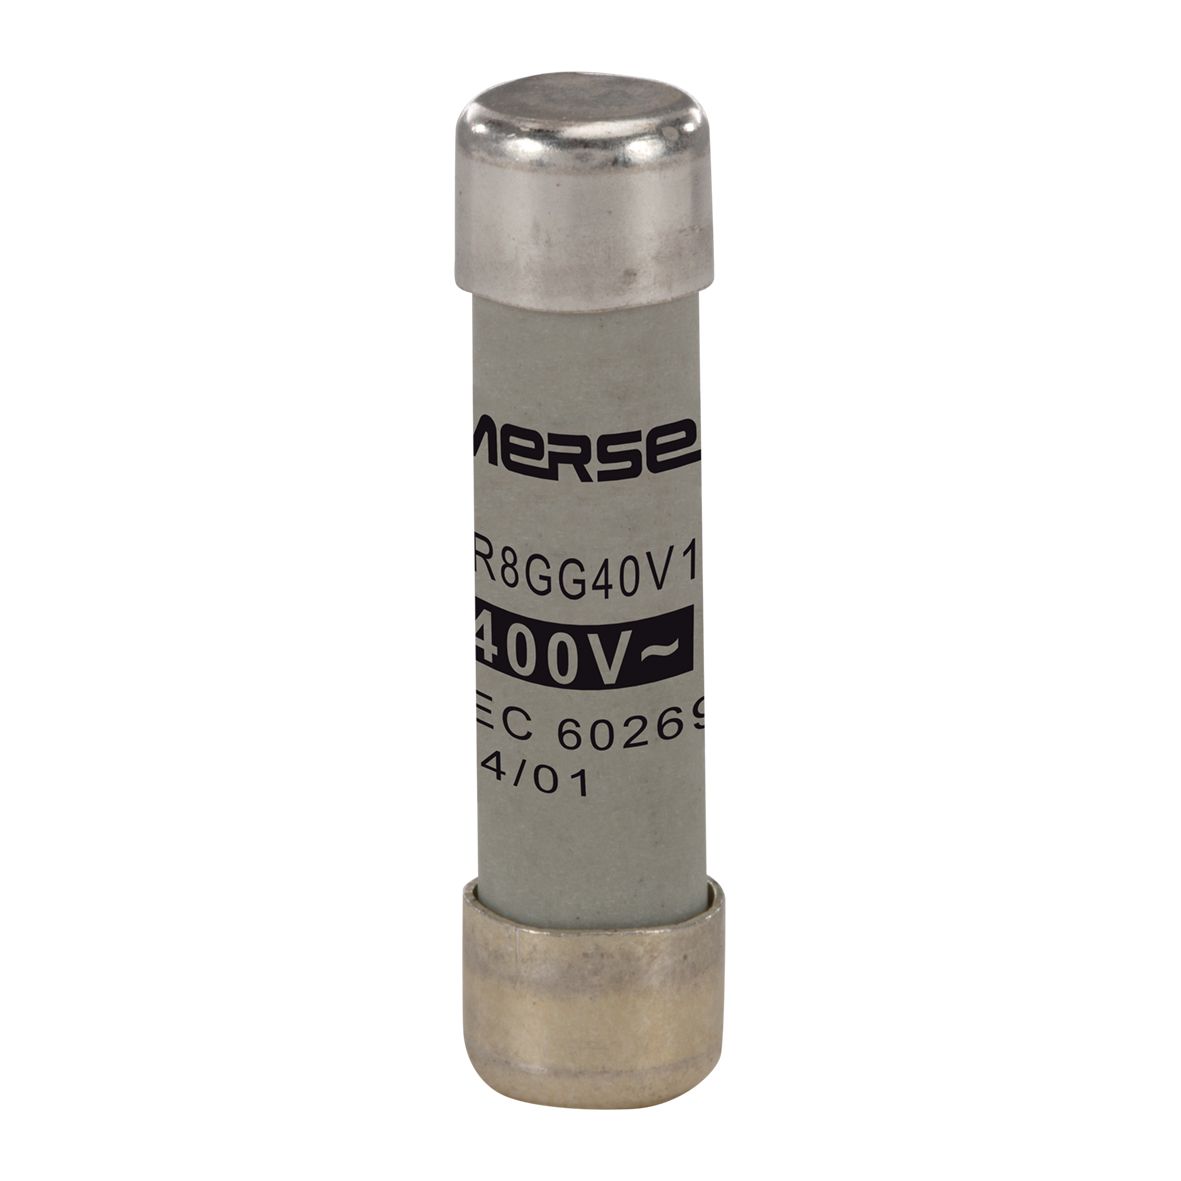 A214613 - Cylindrical fuse-link gG 400VAC 8.5x31.5, 10A